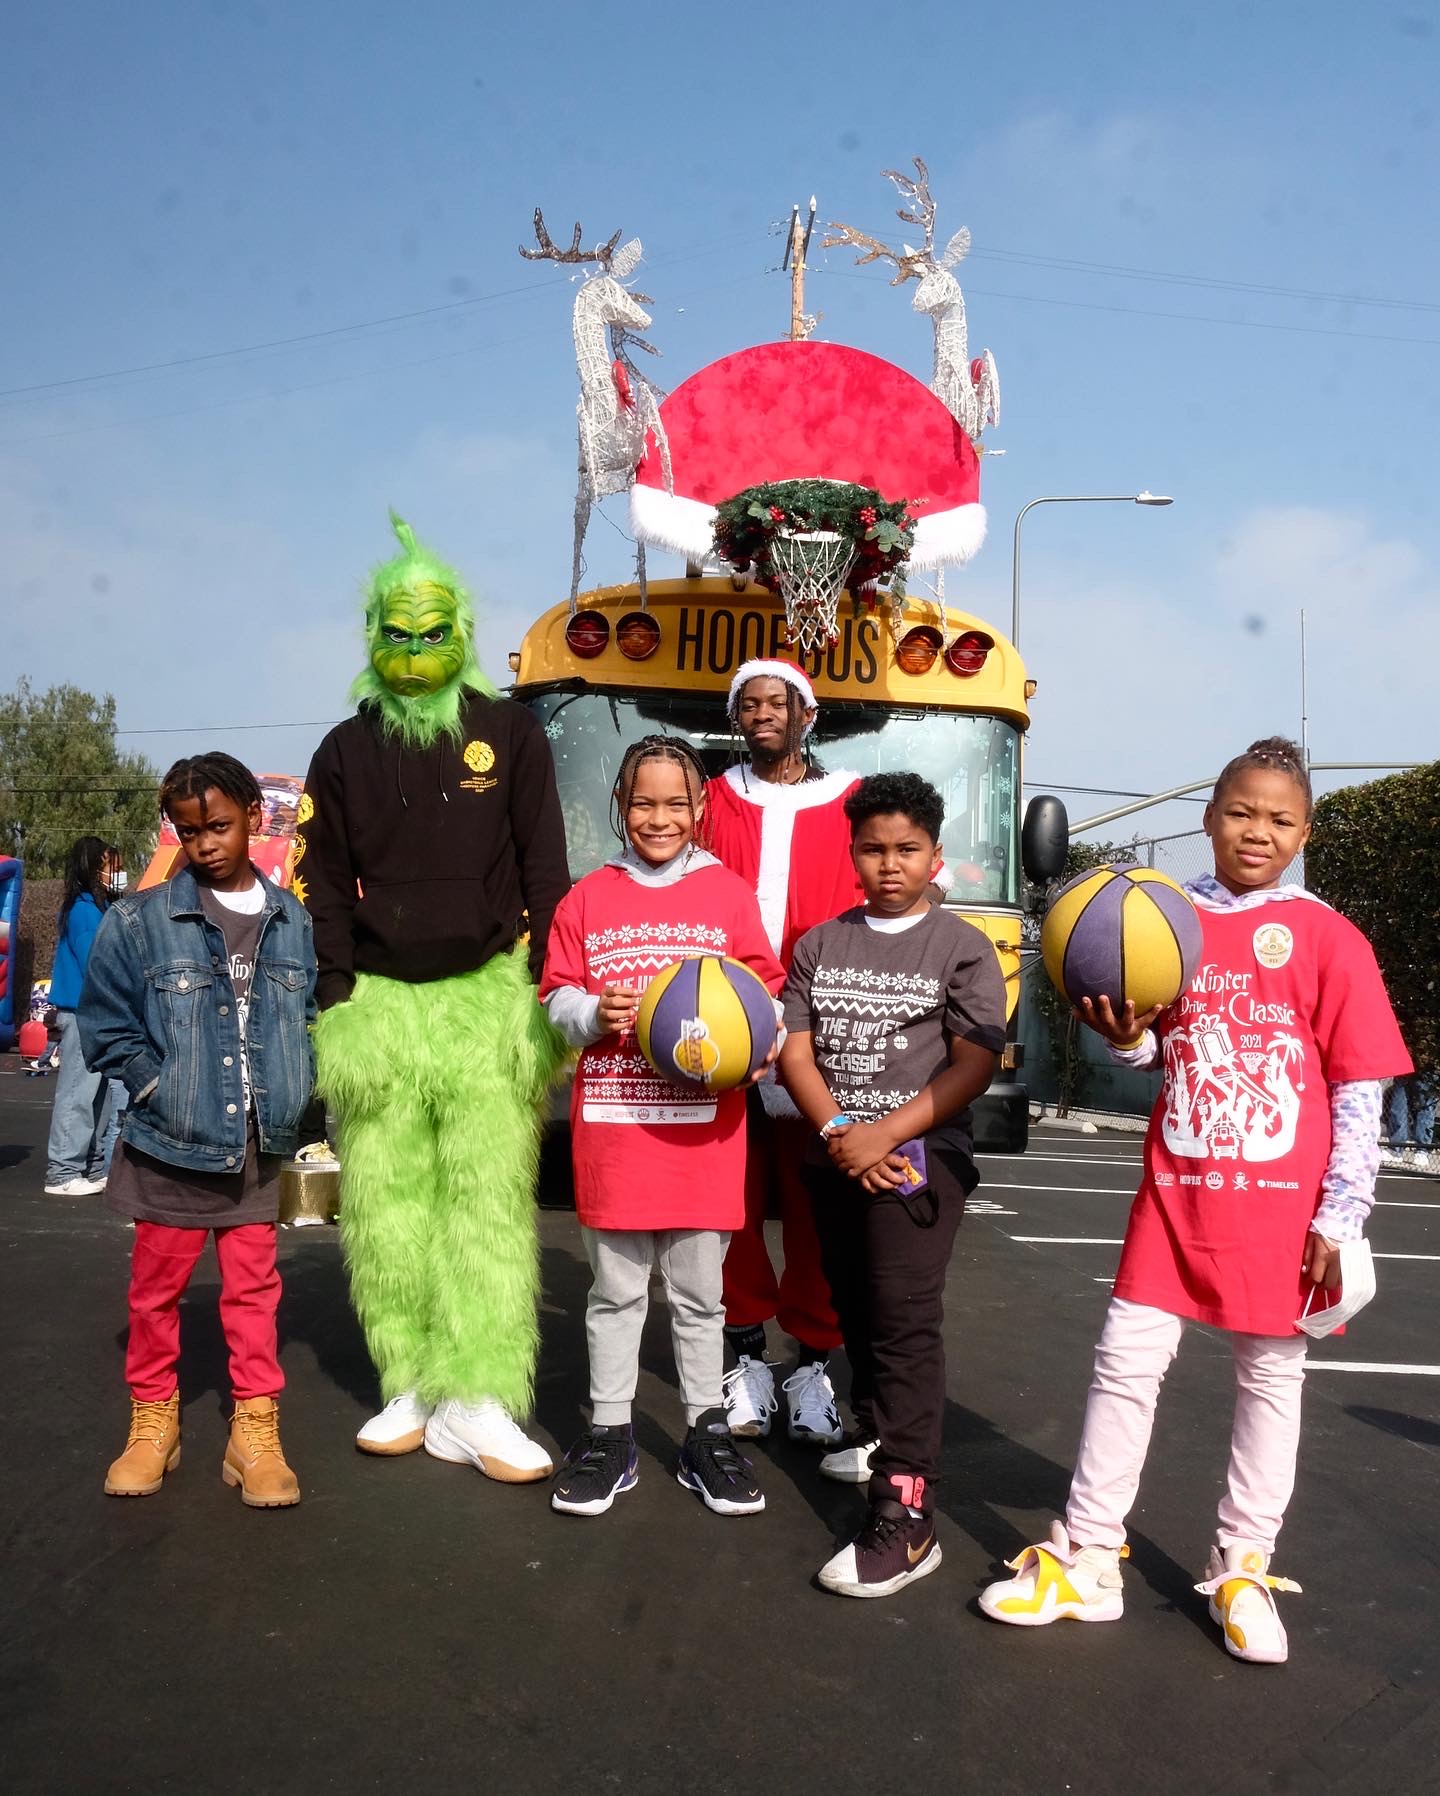 Hoop Sleigh: A Winter of Giving Back